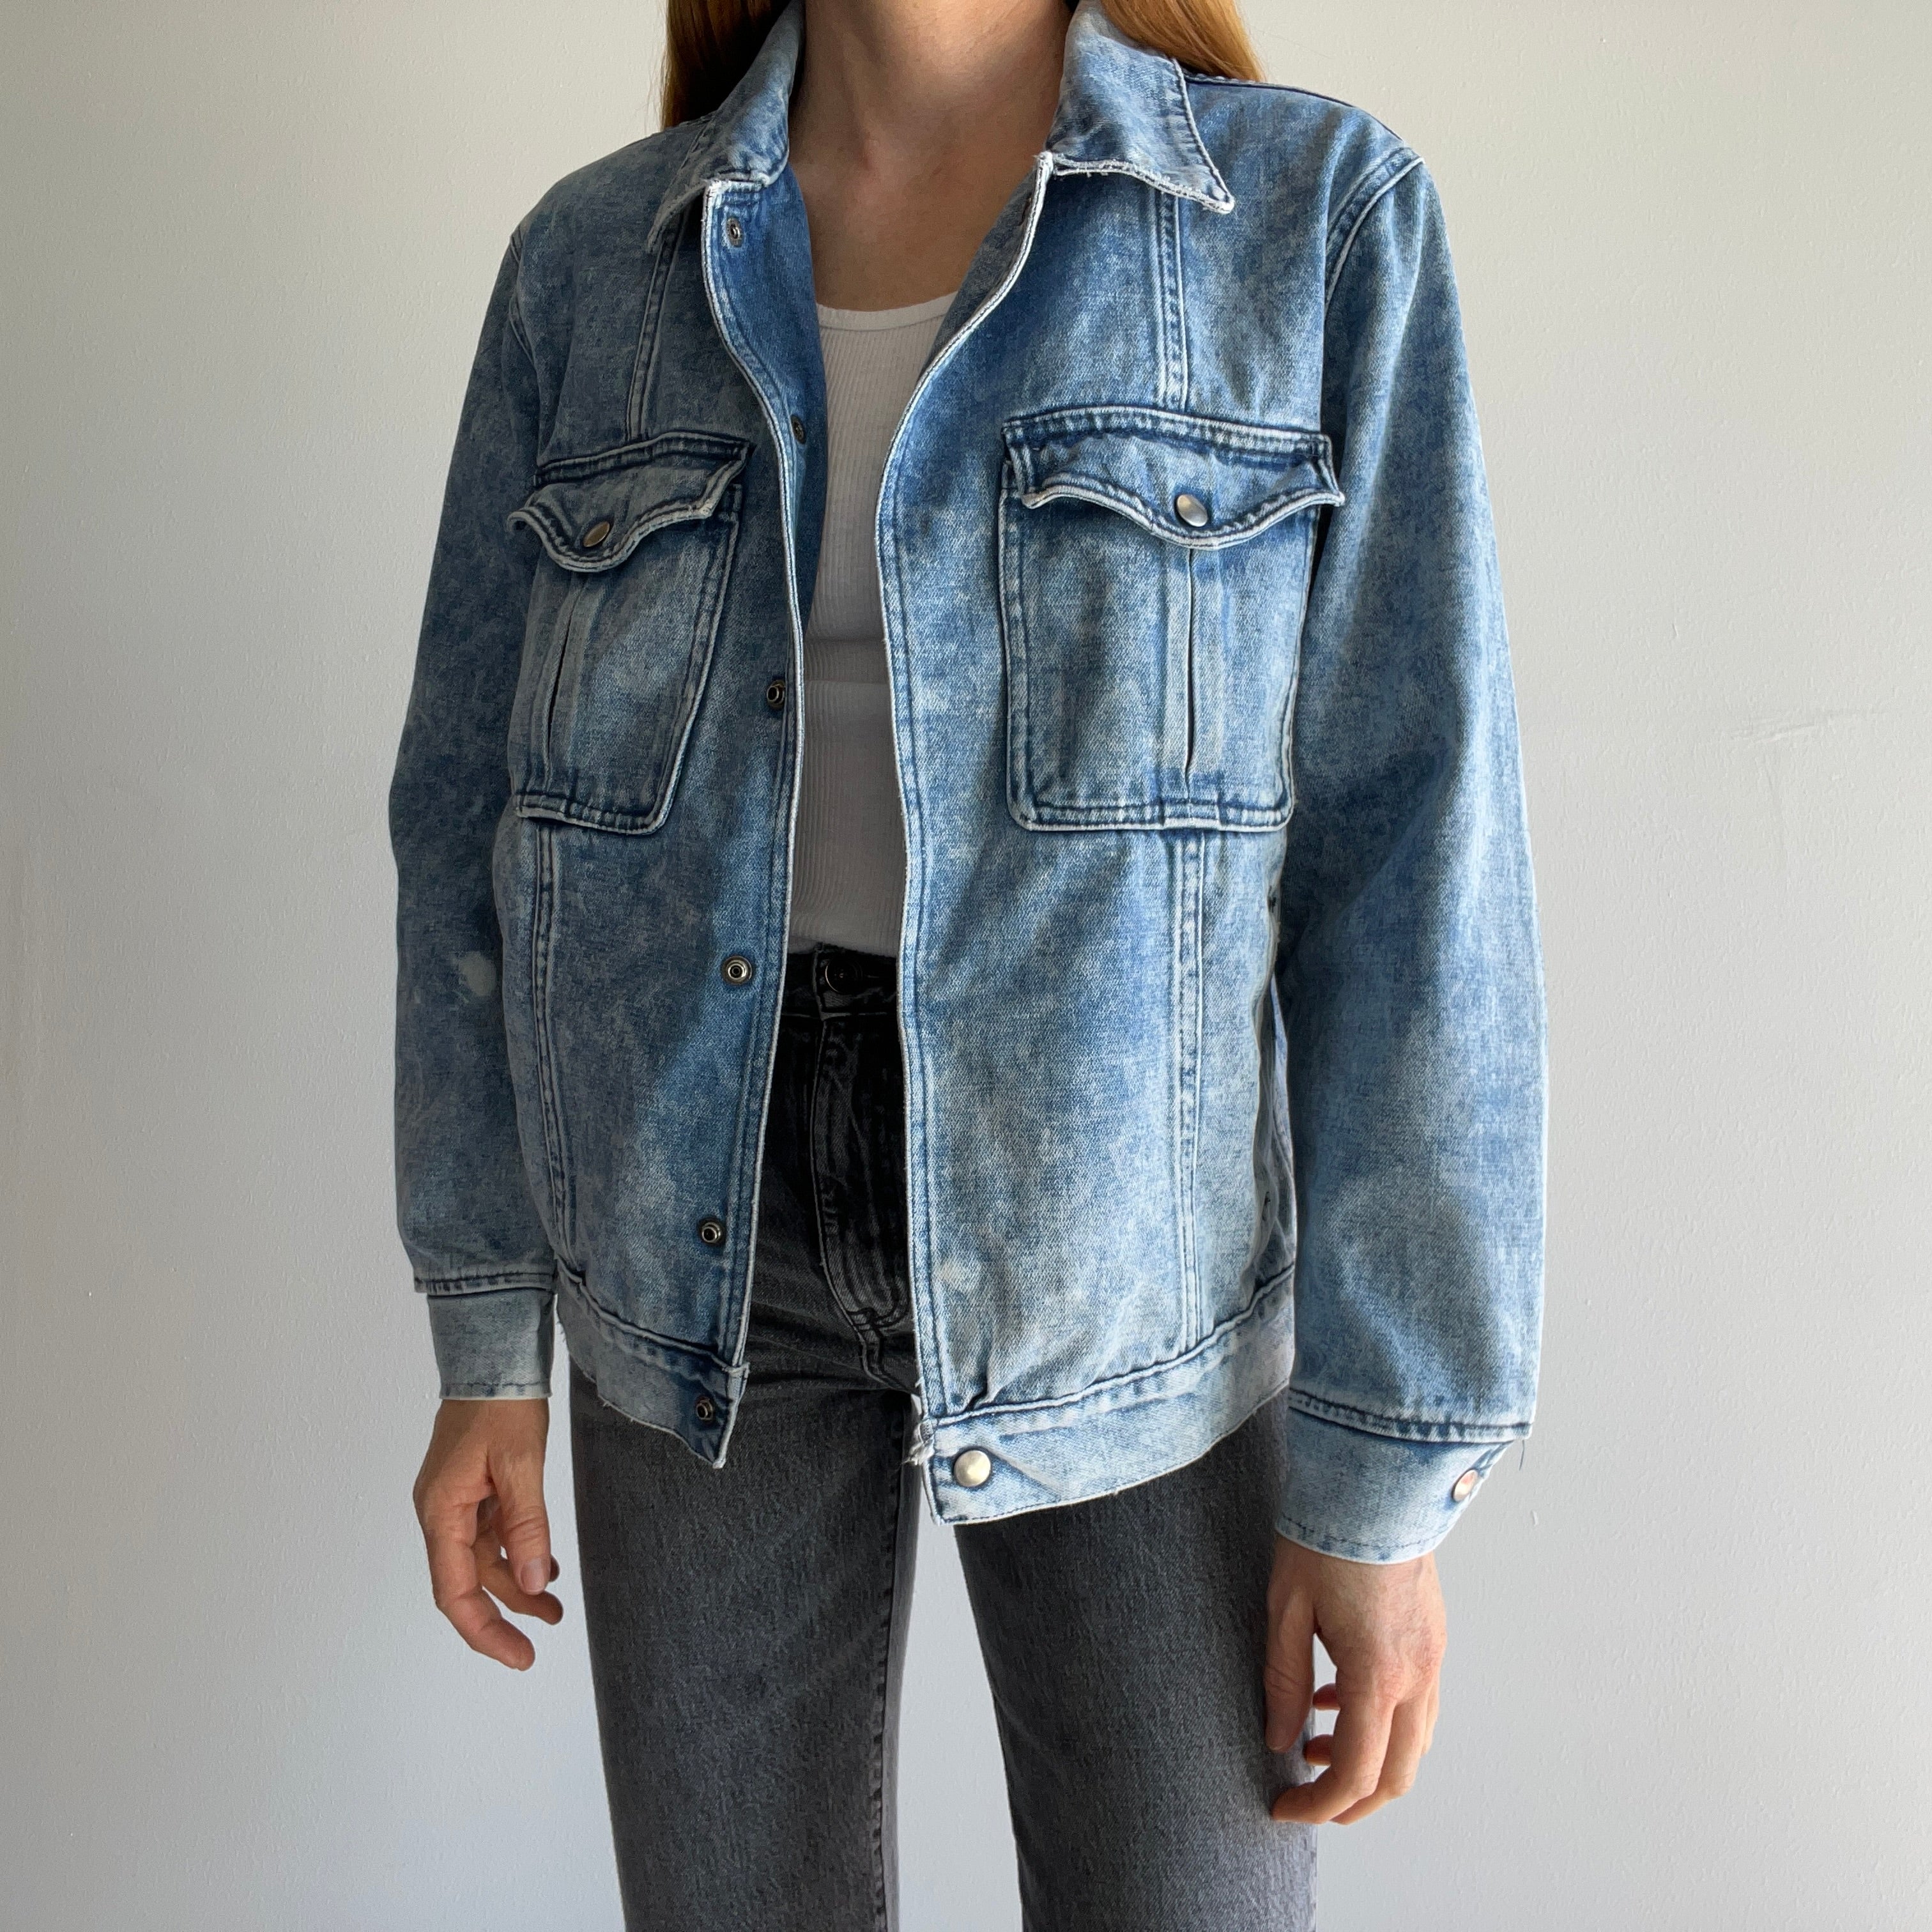 1980s Acid Wash Epic Chest Pocket Snap Denim Jacket with Bleach Staining